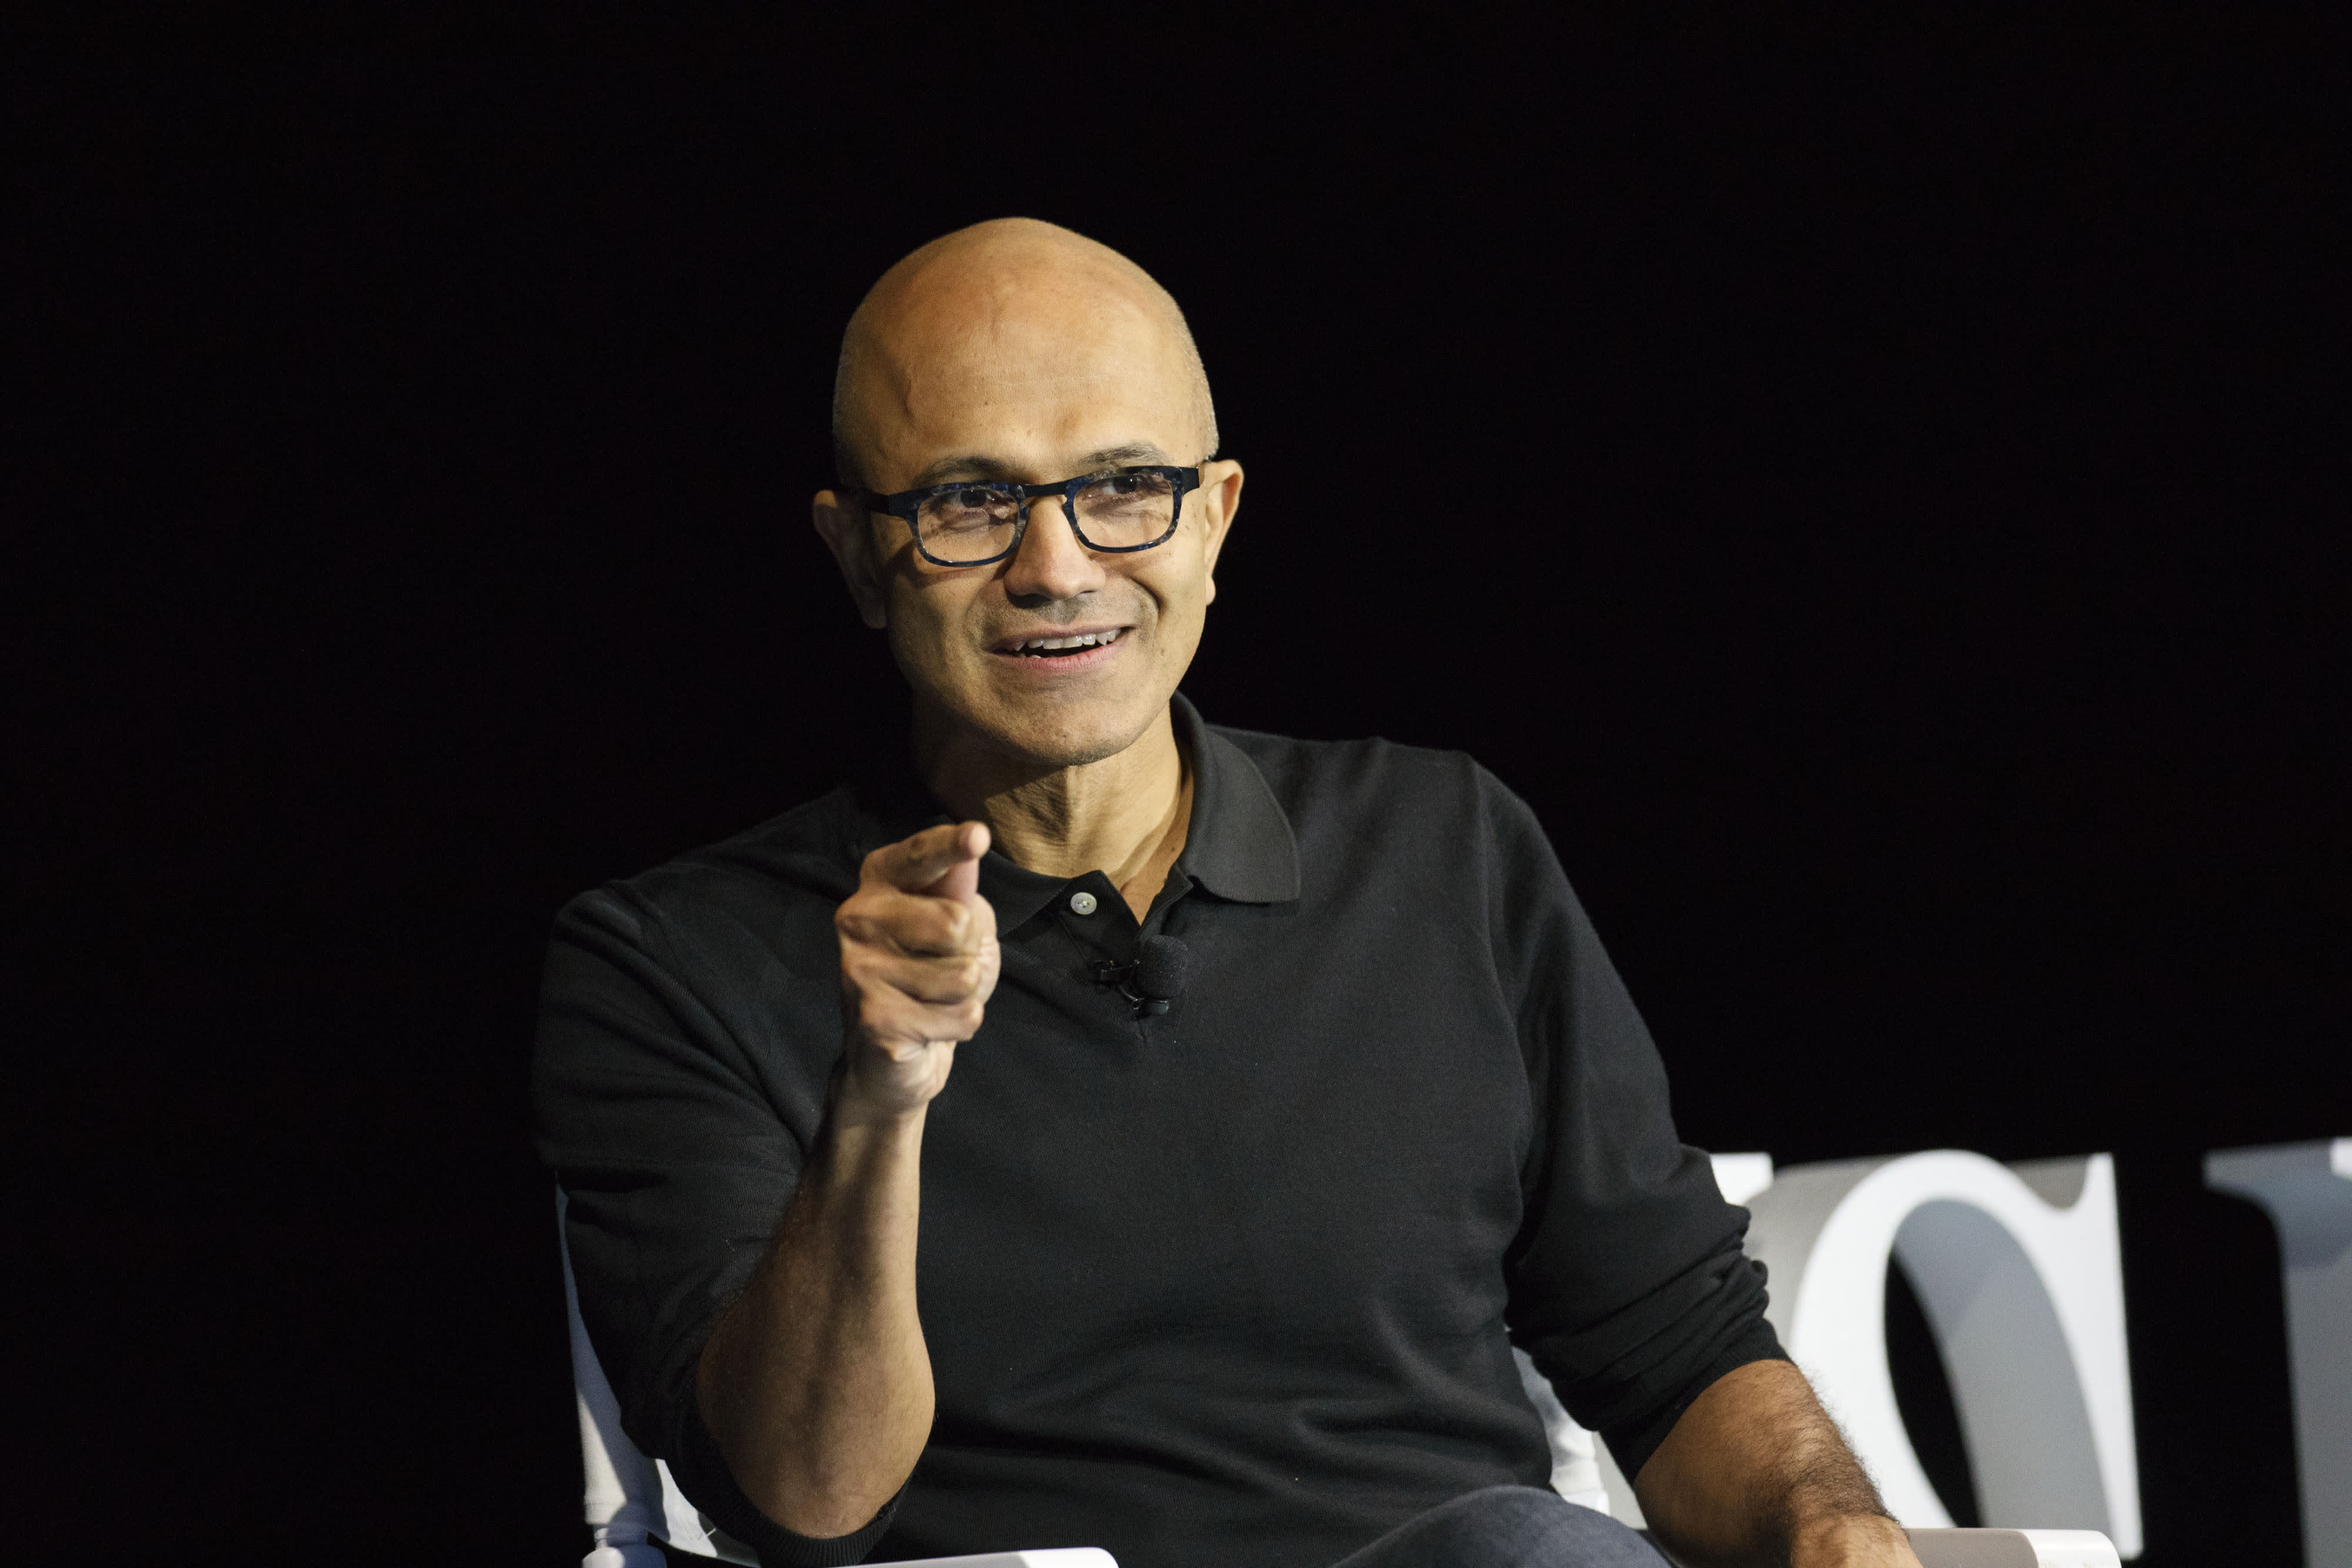 Azure cloud will pass Office to become Microsoft's biggest business next year, says analyst